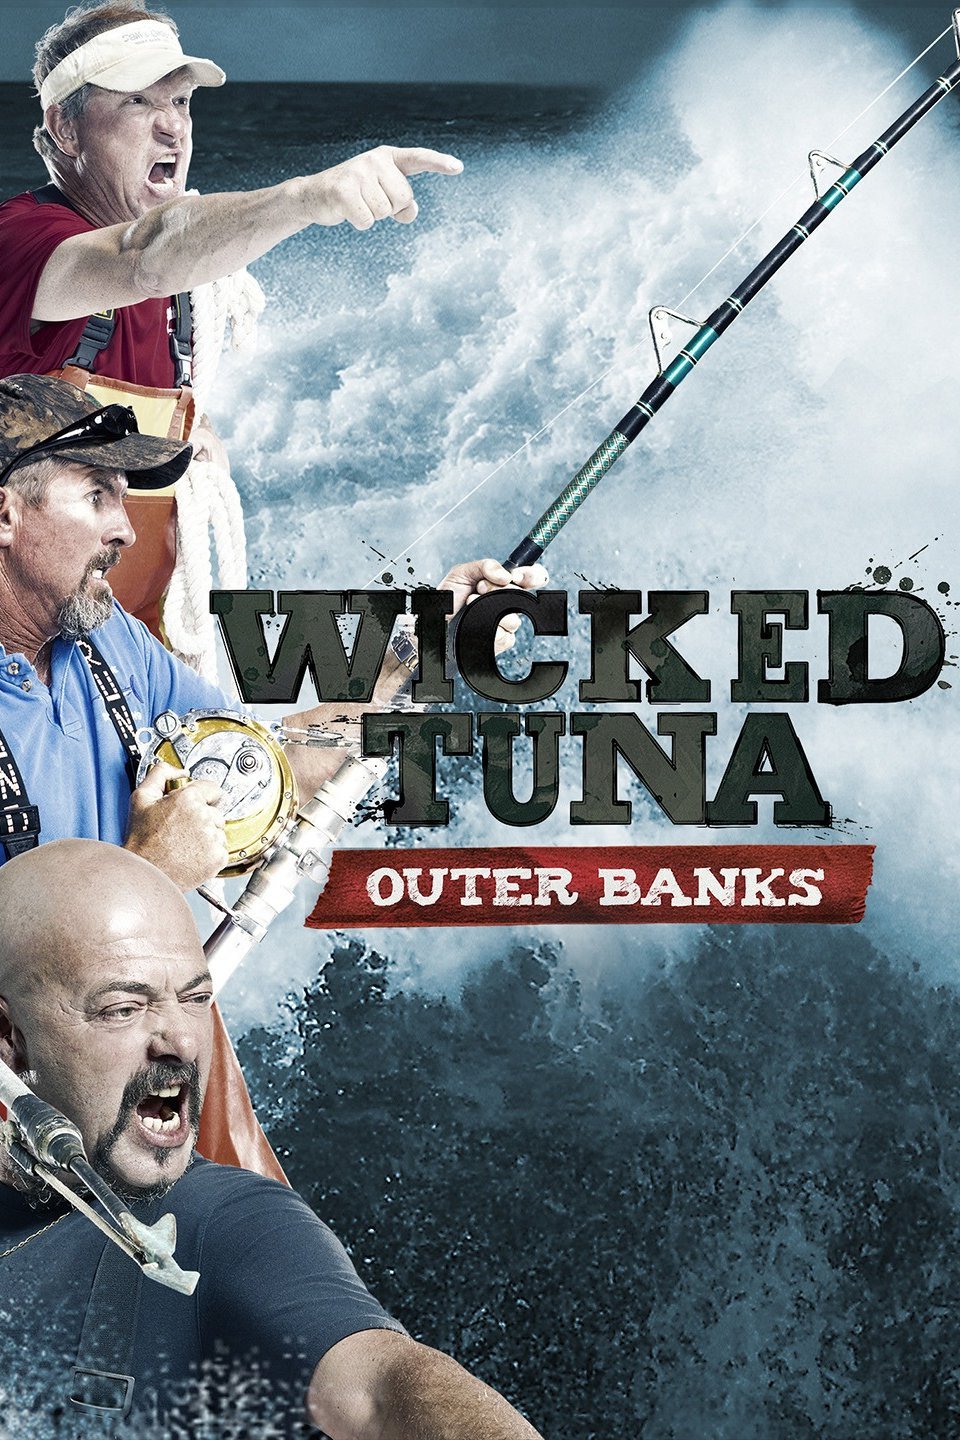 Wicked Tuna Outer Banks Rotten Tomatoes